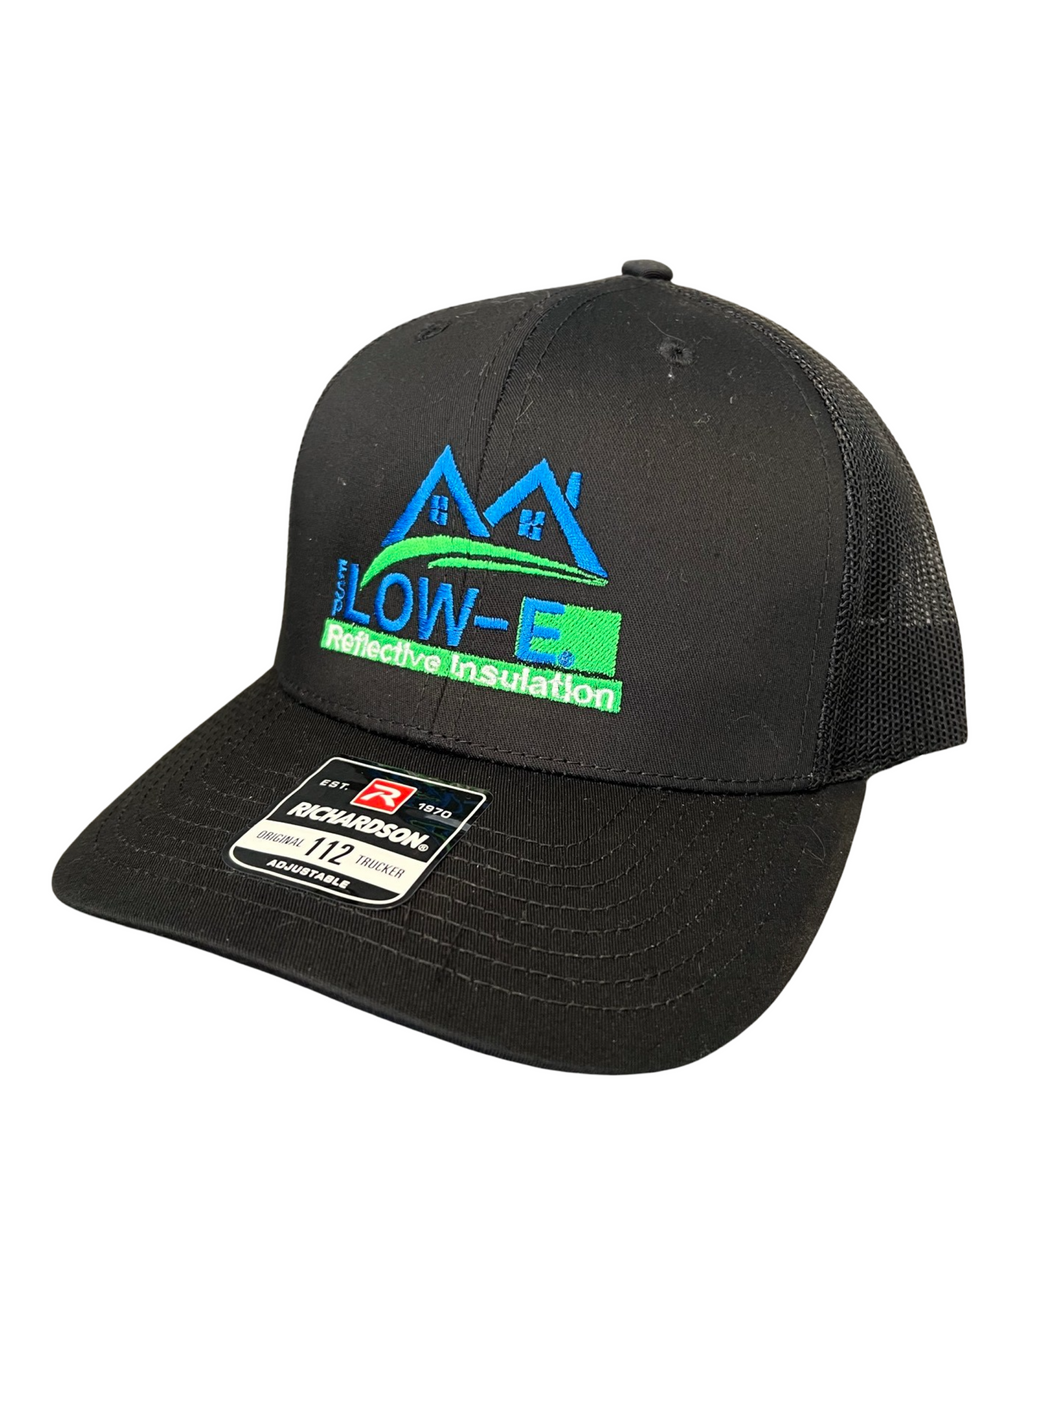 Low-E Insulation Hat